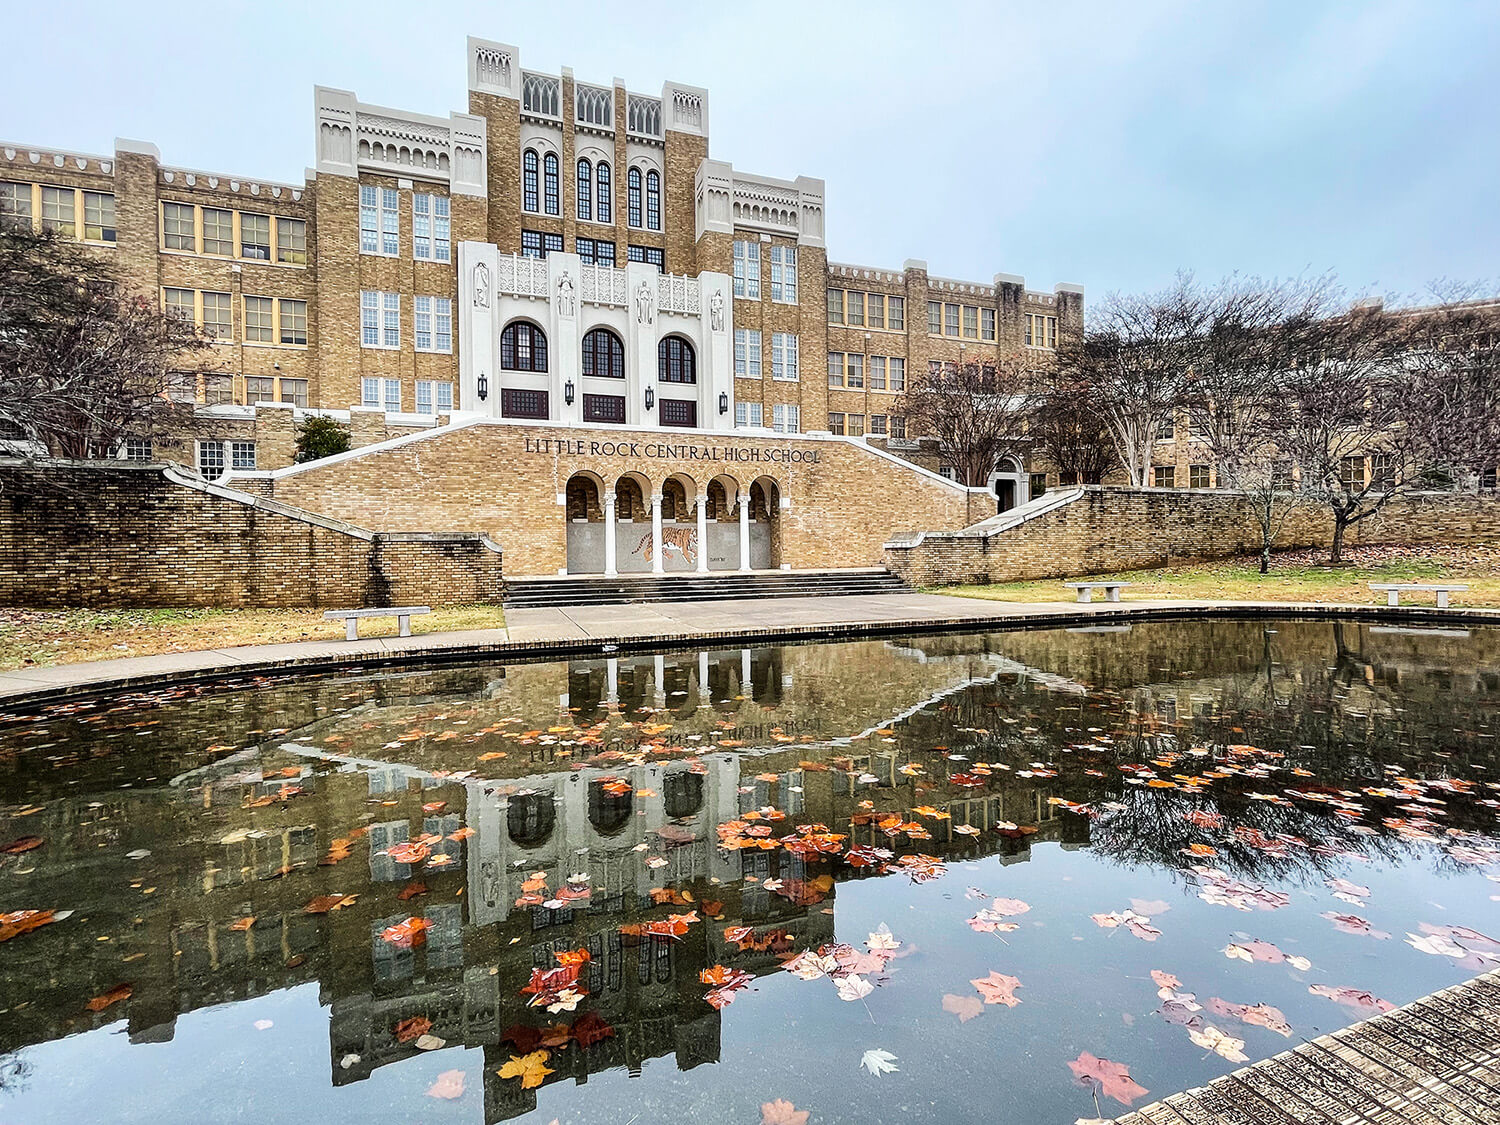 Little Rock Central High School in Little Rock Arkansas photo by Lost with Lydia